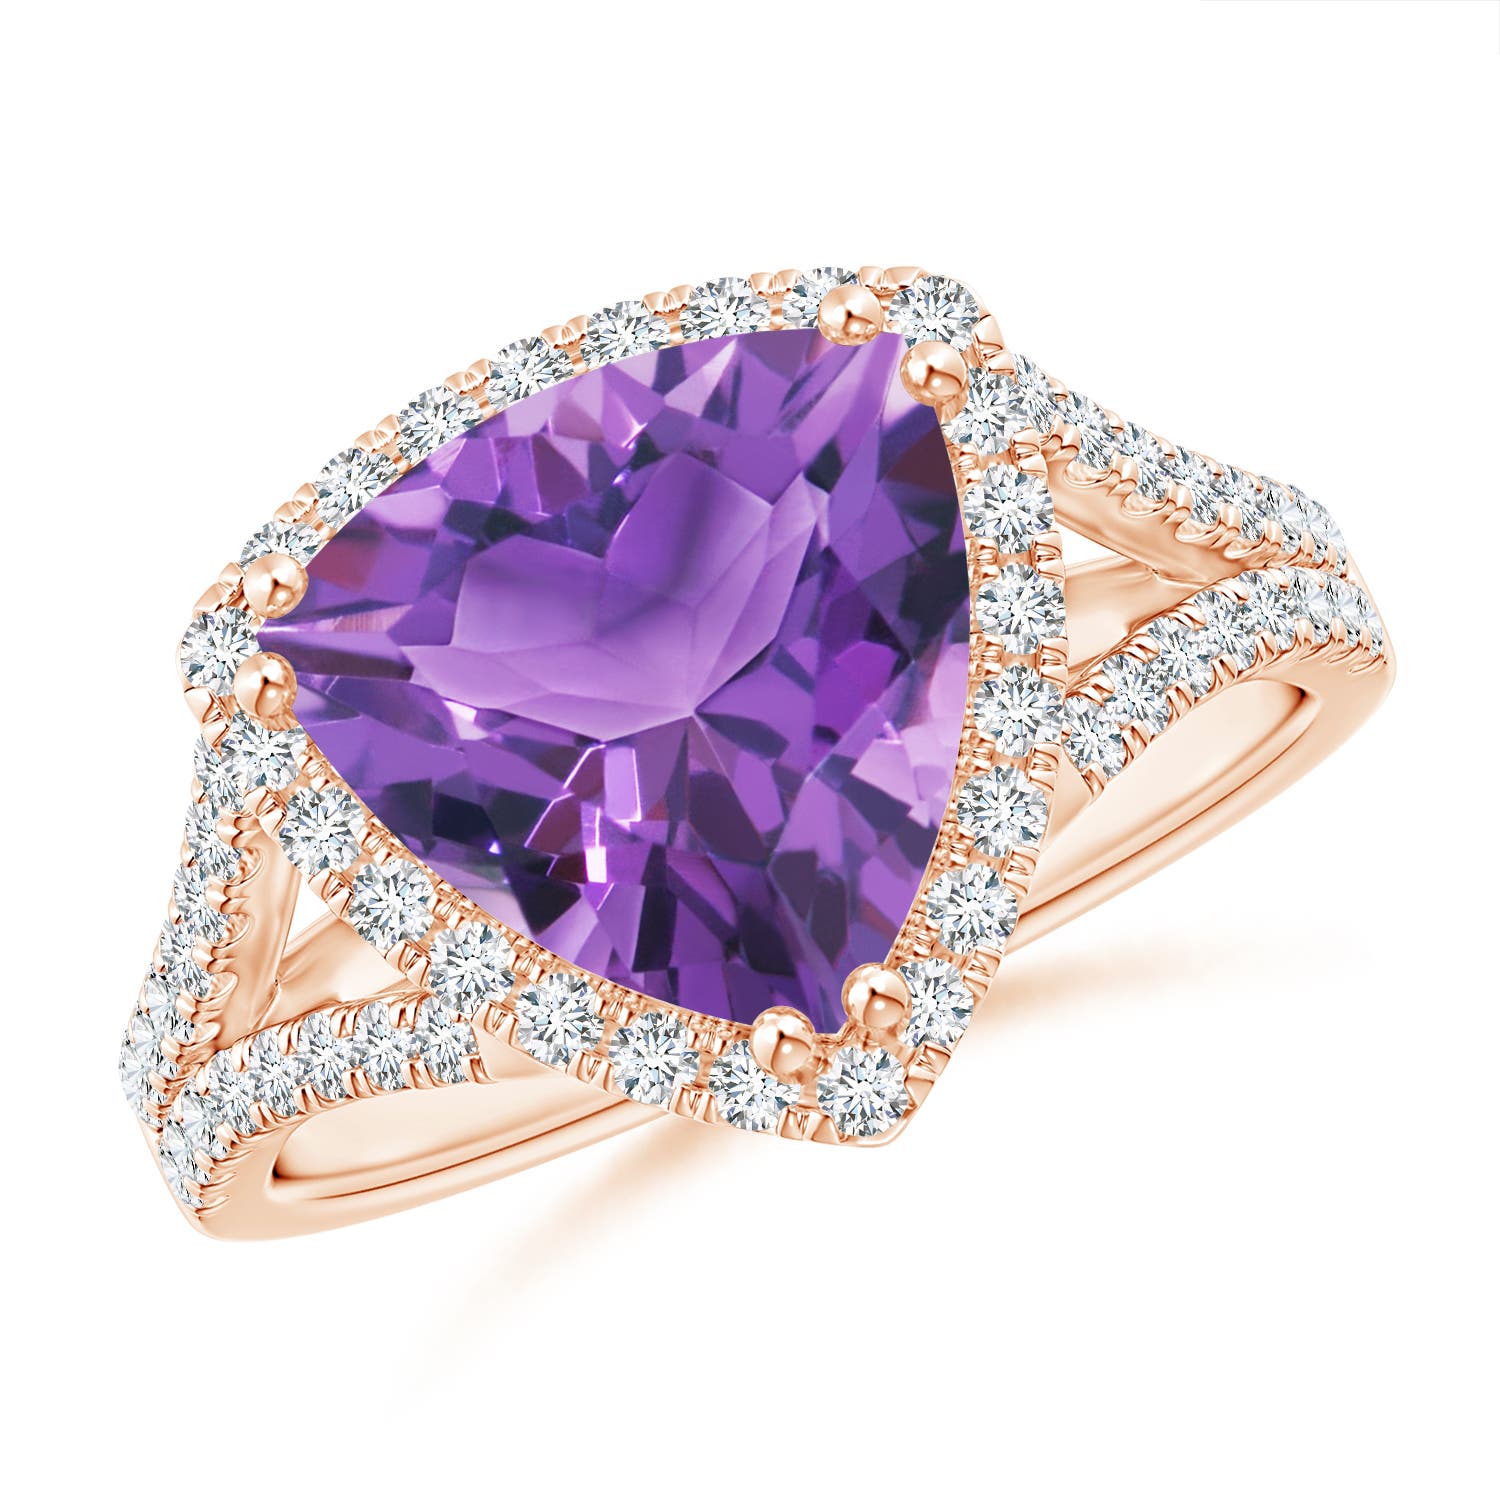 AA - Amethyst / 3.16 CT / 14 KT Rose Gold